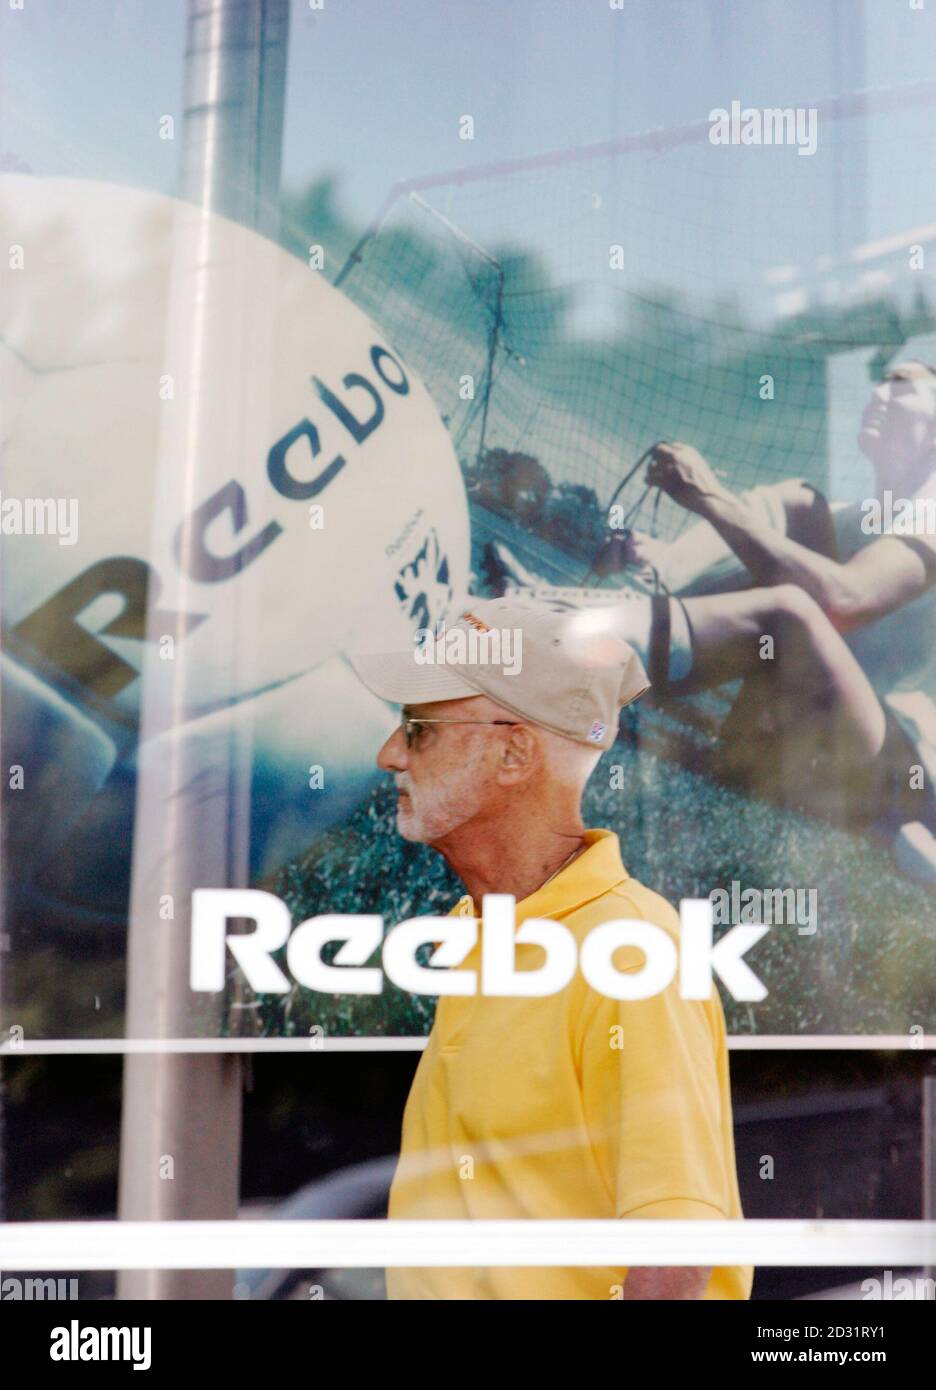 Outlet Reebok Y Adidas Deals, SAVE 41% - www.experiencegrace.church